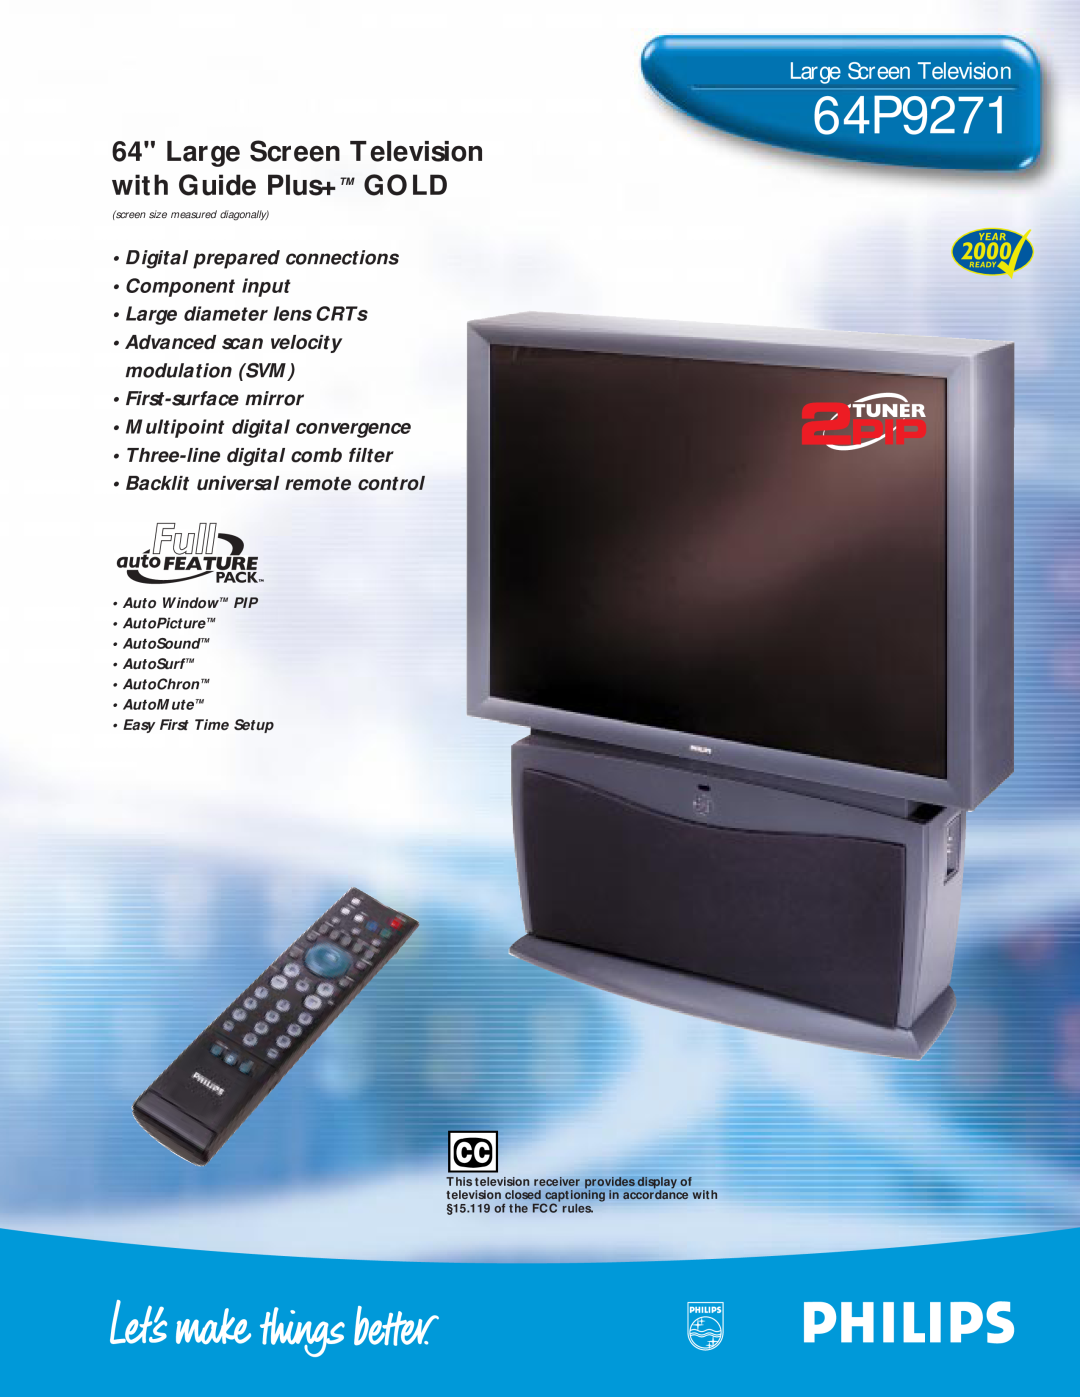 Philips 64P 9271 manual 64P9271, Large Screen Television with Guide Plus+ GOLD, Advanced scan velocity modulation SVM 